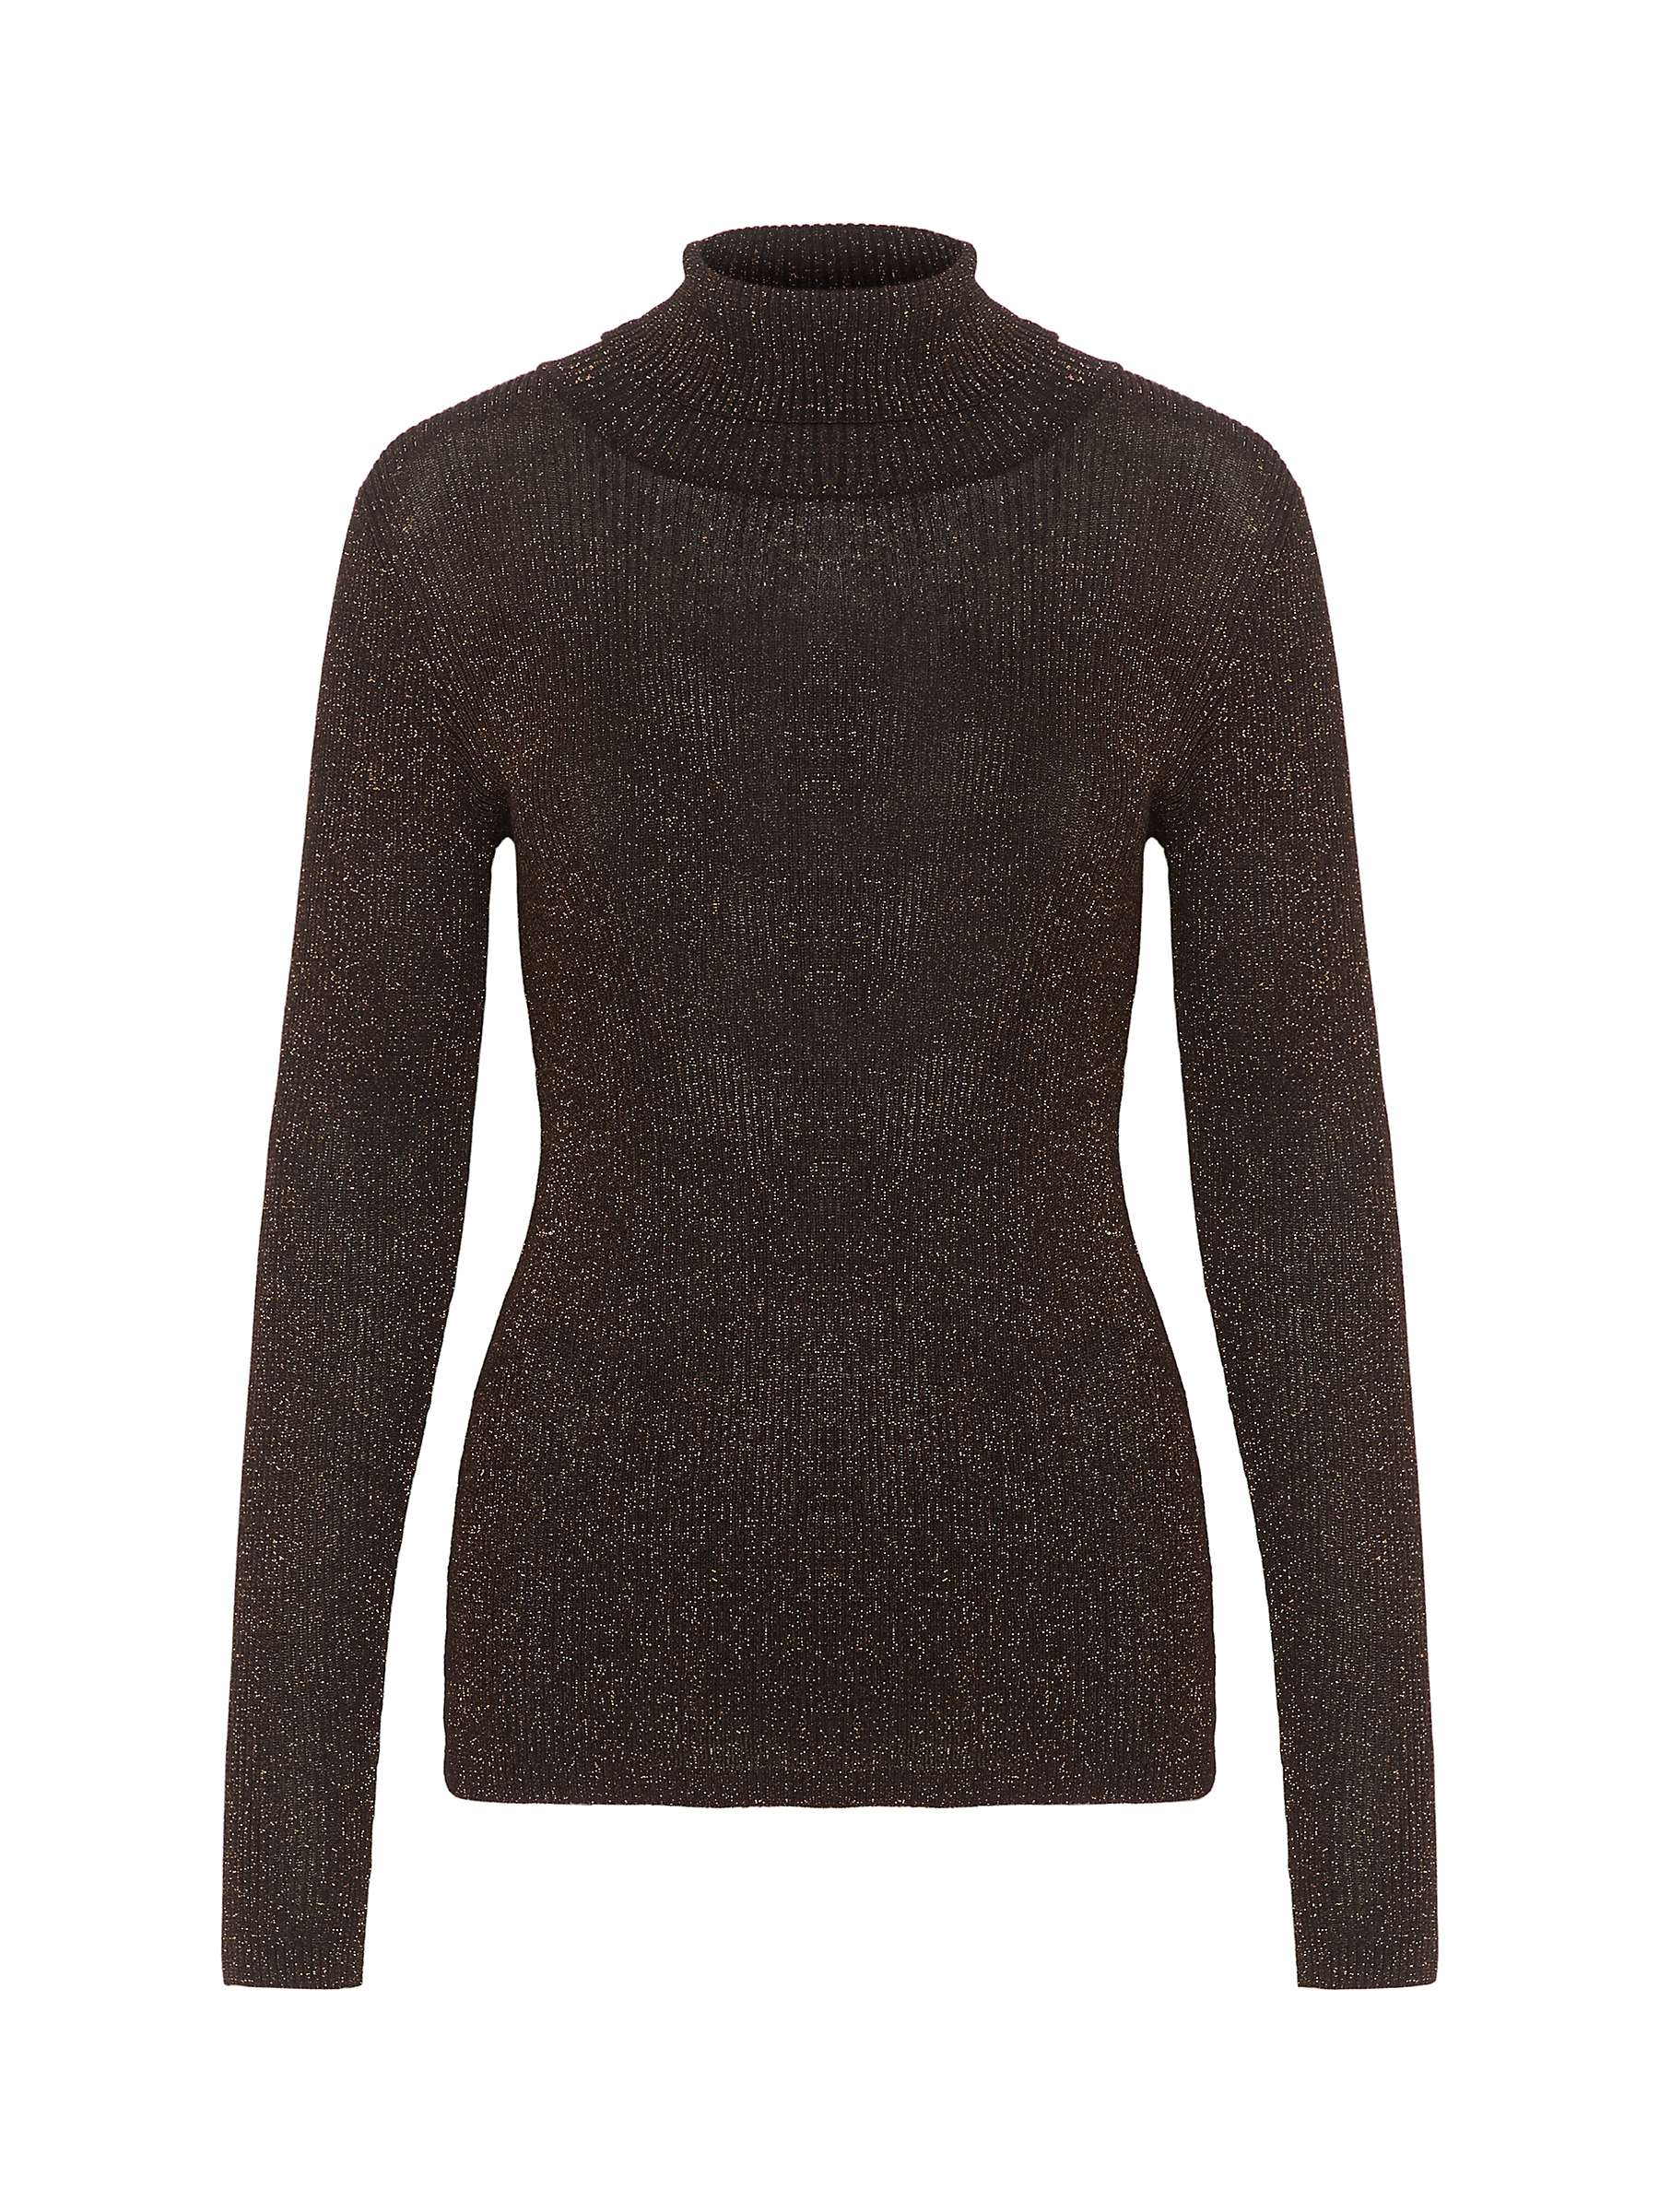 Buy Soaked In Luxury Carina Metallic Knit Slim Fit Pullover Jumper Online at johnlewis.com